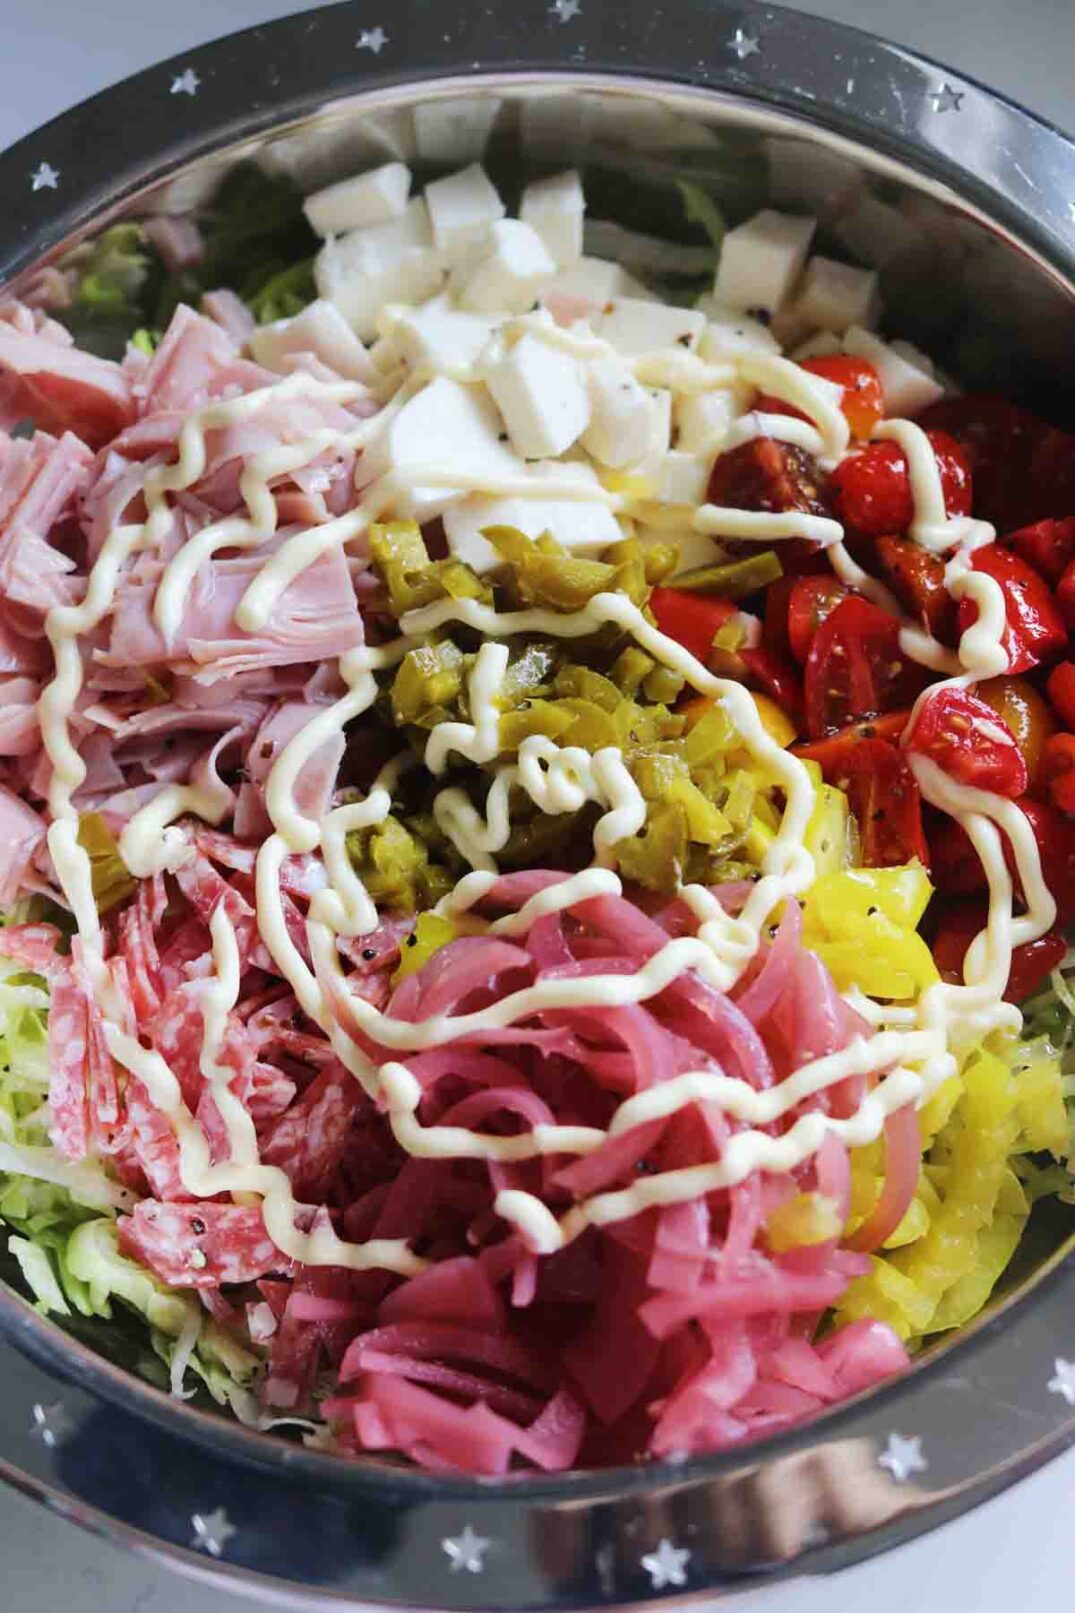 mayo swirled above chopped up colorful veggies, italian cold cuts, and mozzarella in a silver bowl with shredded lettuce.